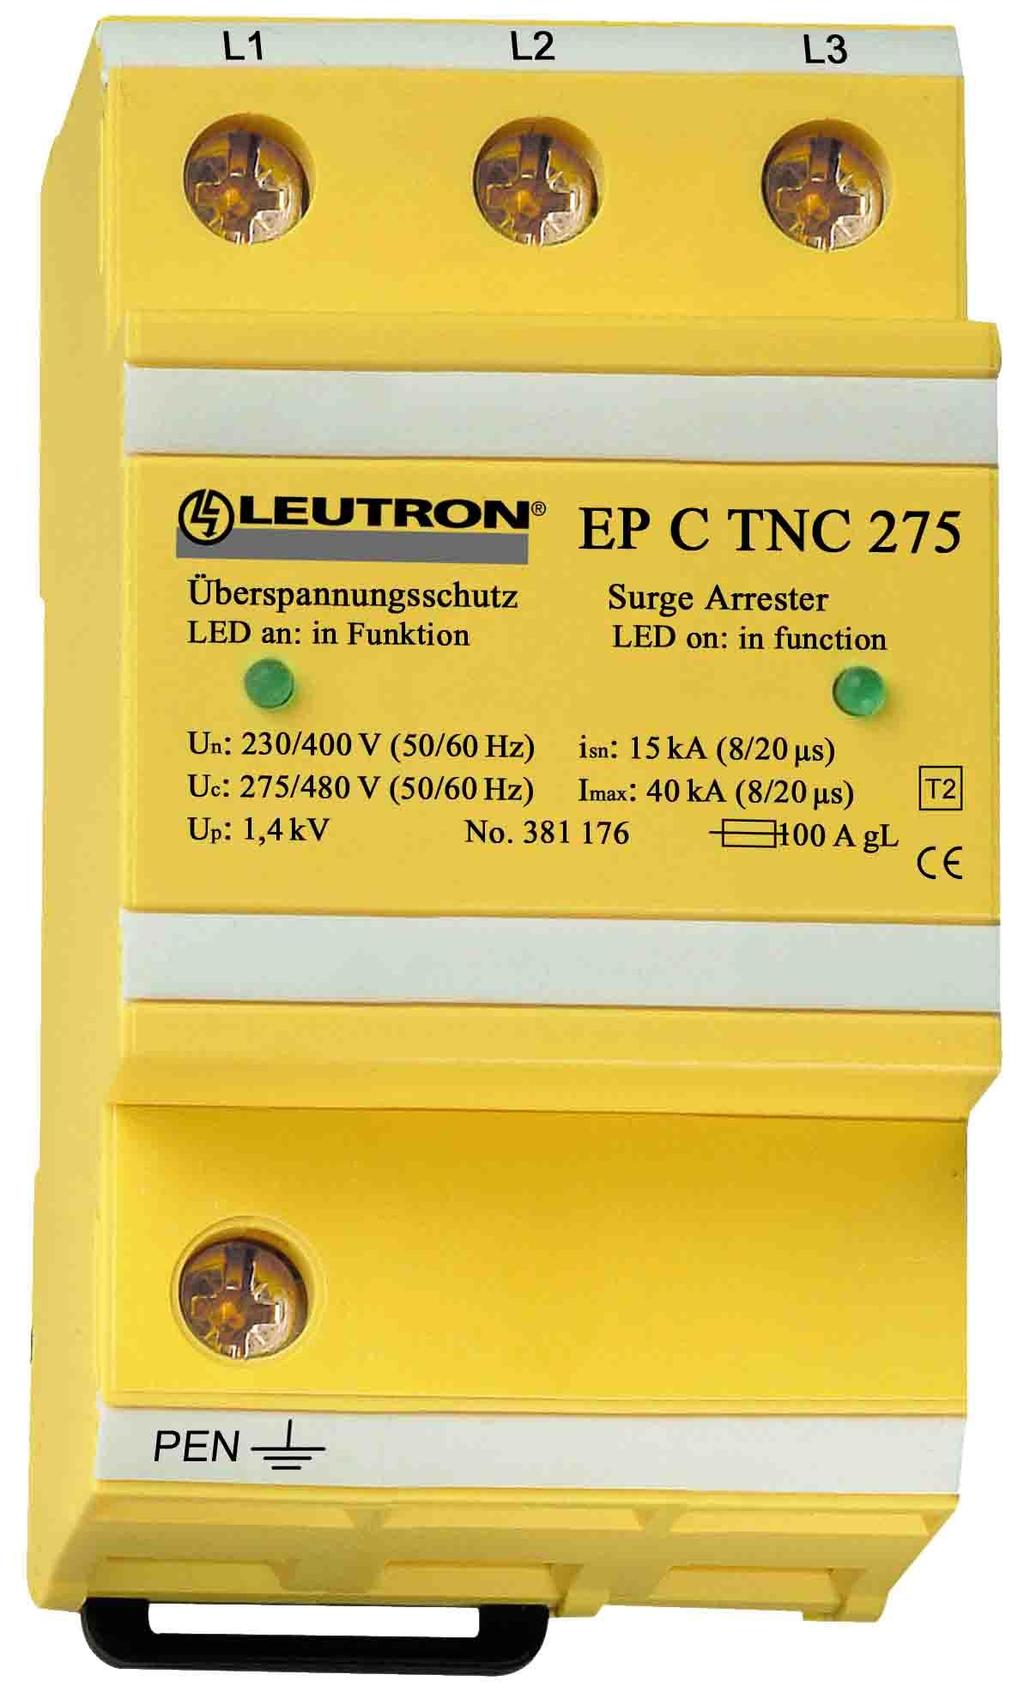 Surge Protection EnerPro C TN EP C TN 275 (/FM) EP C TNC 275 (/FM) EP C TNS 275 (/FM) Combined multi-pole Surge Protective Device (SPD) protection category T2 (C) meeting the requirements of class II